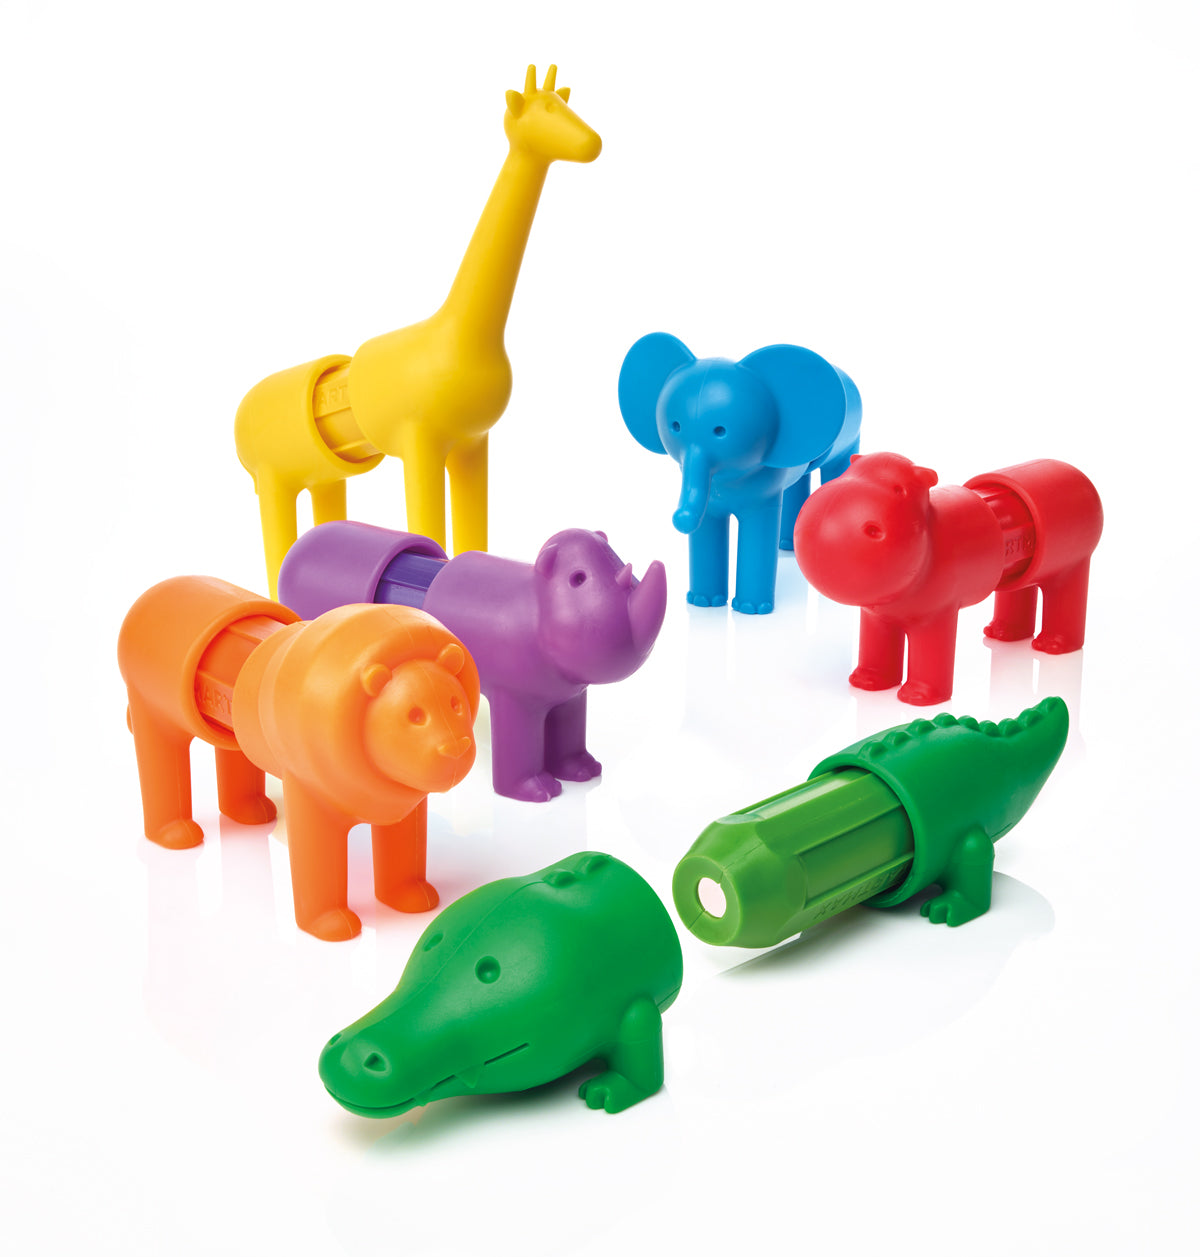 SmartMax My First Animals (assorted) - The Toy Box Hanover